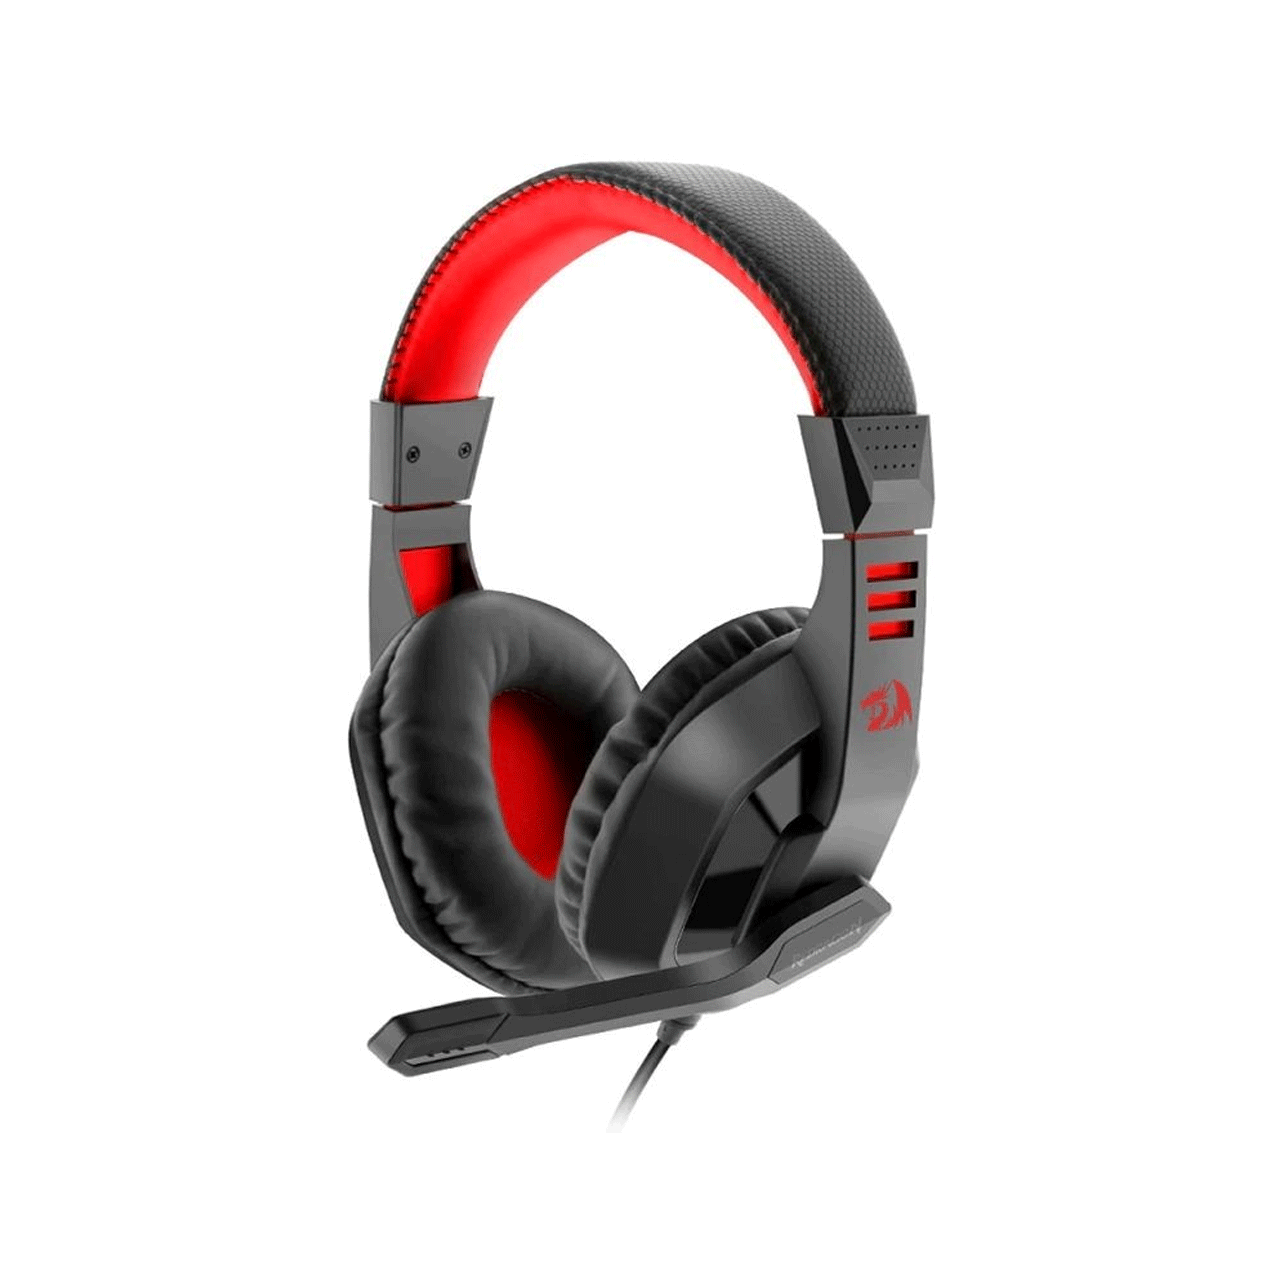 Redragon-Ares-H120-headset - Copy